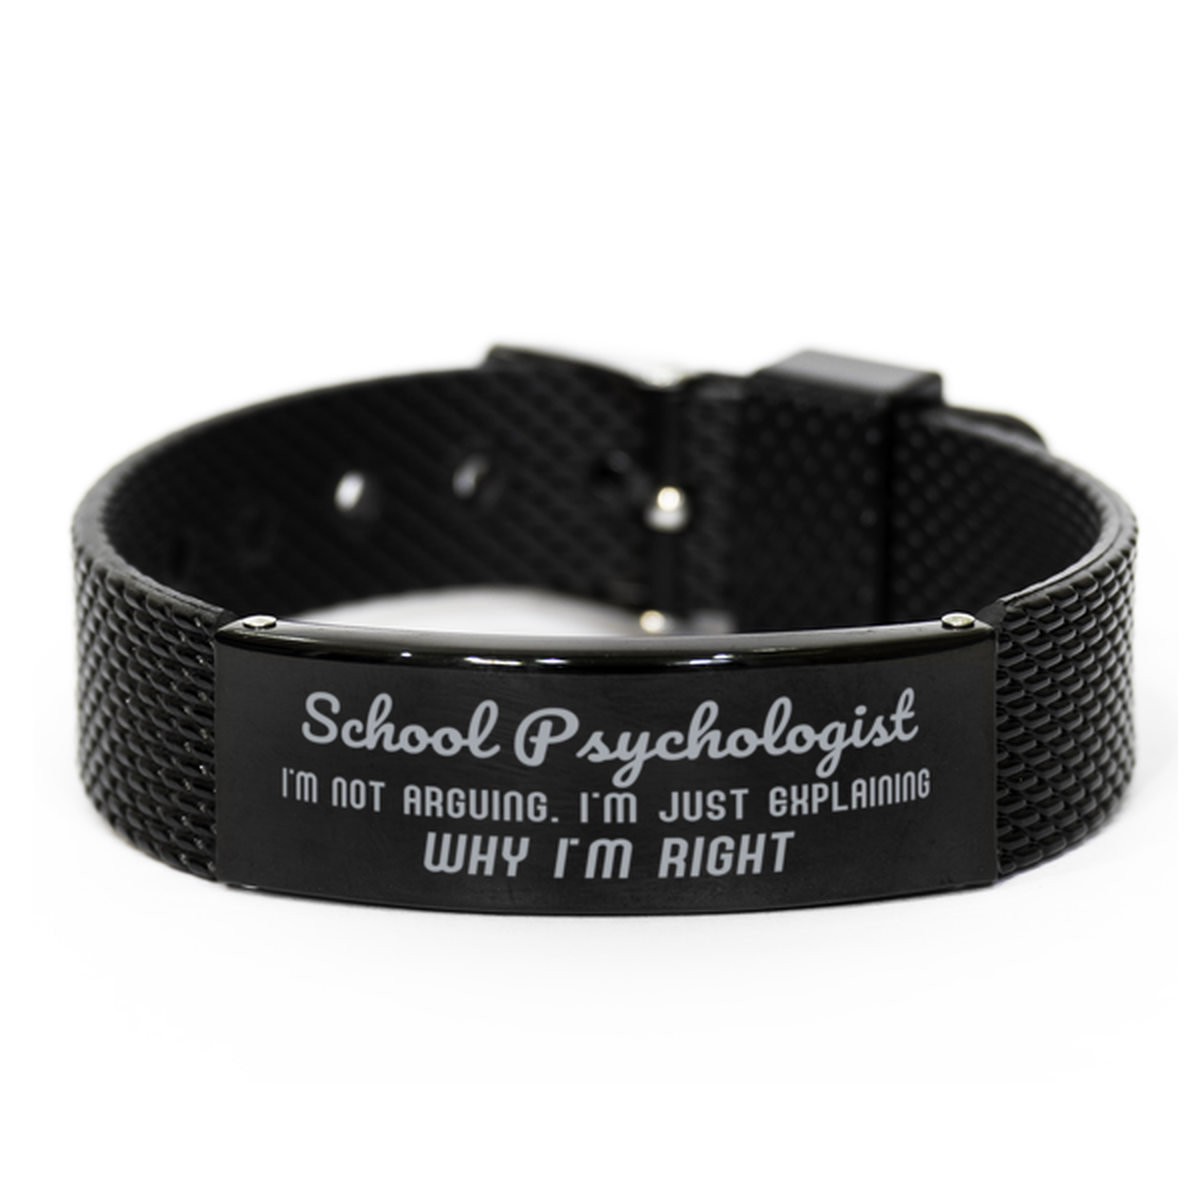 School Psychologist I'm not Arguing. I'm Just Explaining Why I'm RIGHT Black Shark Mesh Bracelet, Funny Saying Quote School Psychologist Gifts For School Psychologist Graduation Birthday Christmas Gifts for Men Women Coworker